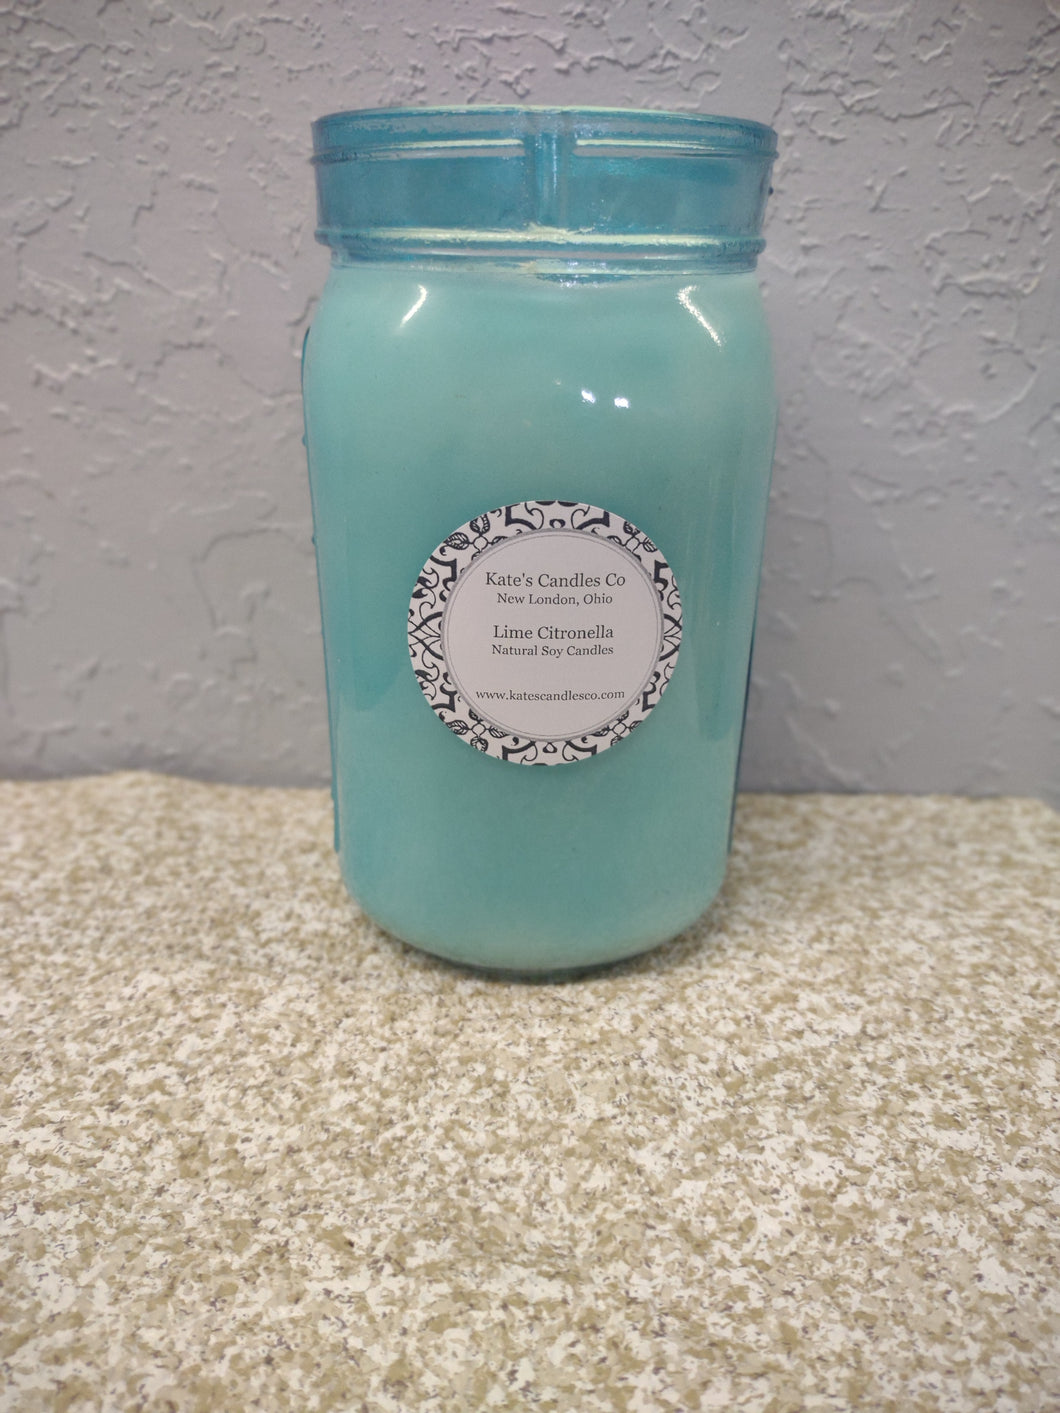 Citronella Lime Soy Candles - Kate's Candles Co.